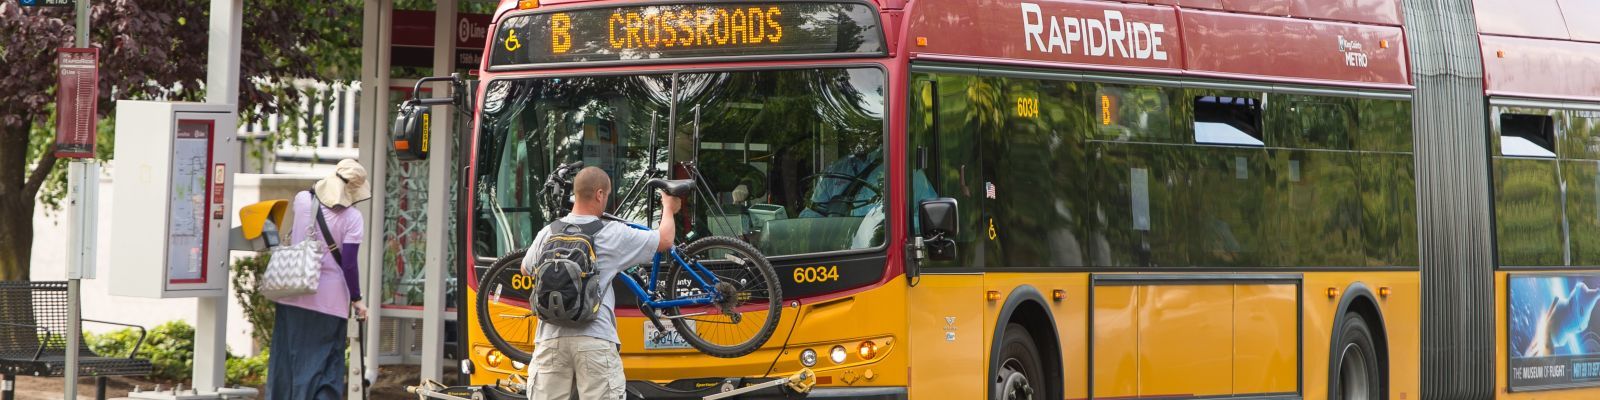 Image of a person placing a bicycle on the bike rack of a King County Metro RapidRide bus